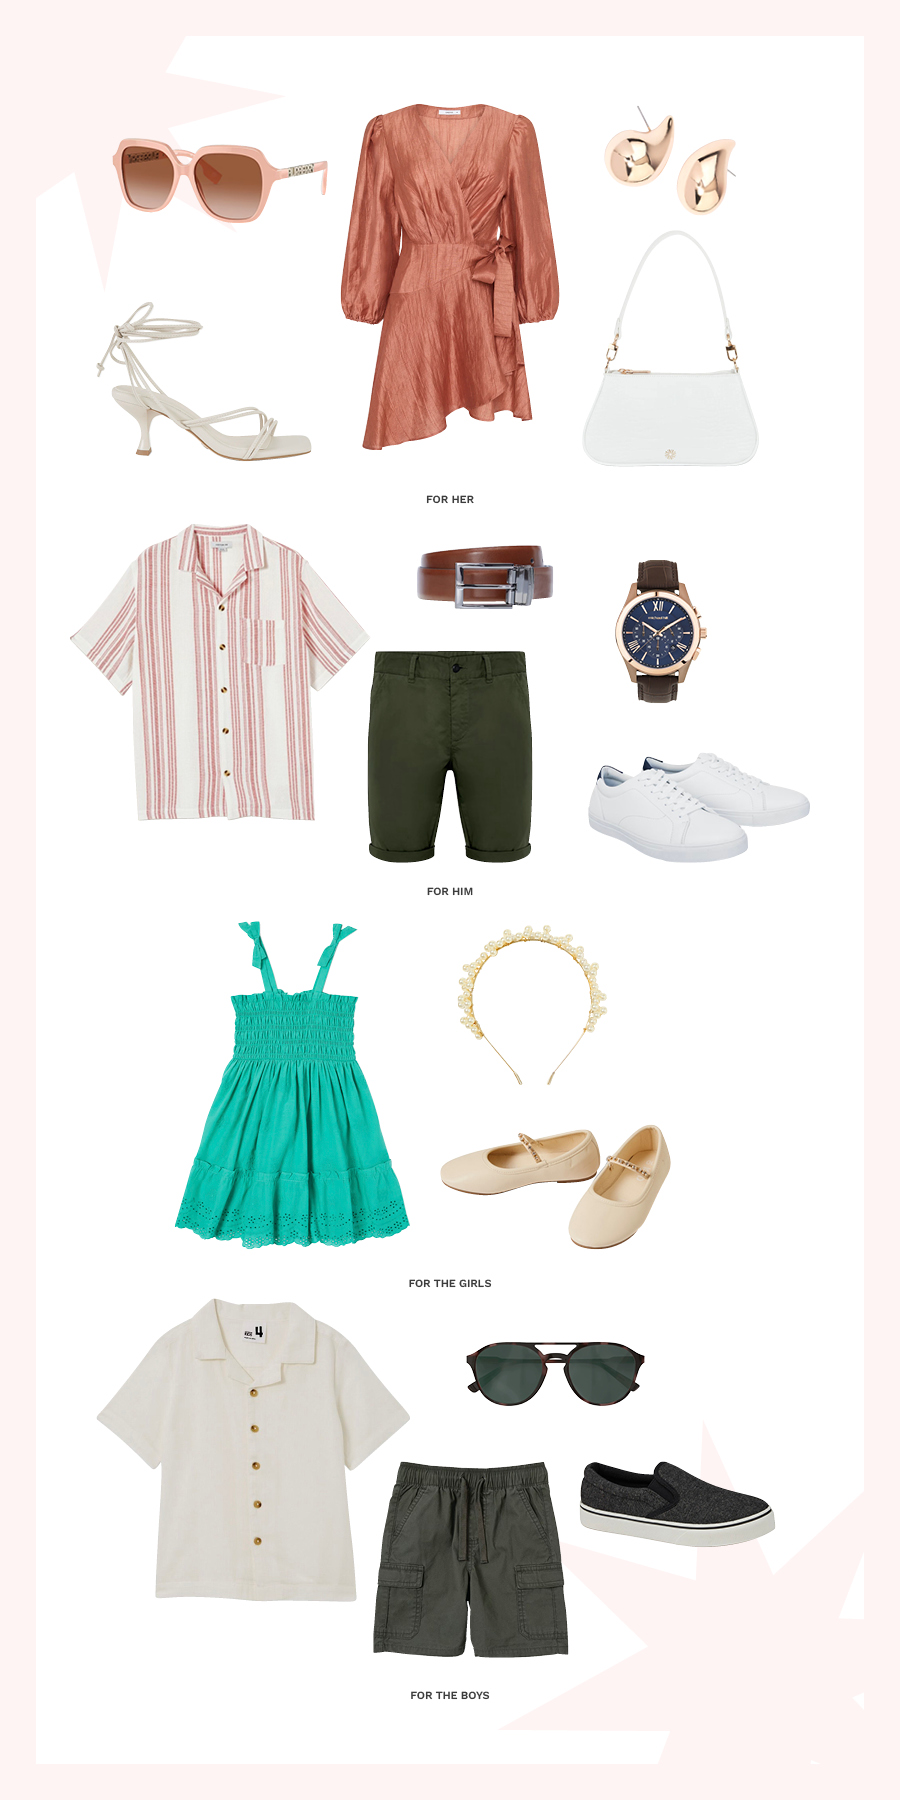 Christmas party outfit ideas for the whole family | Stockland